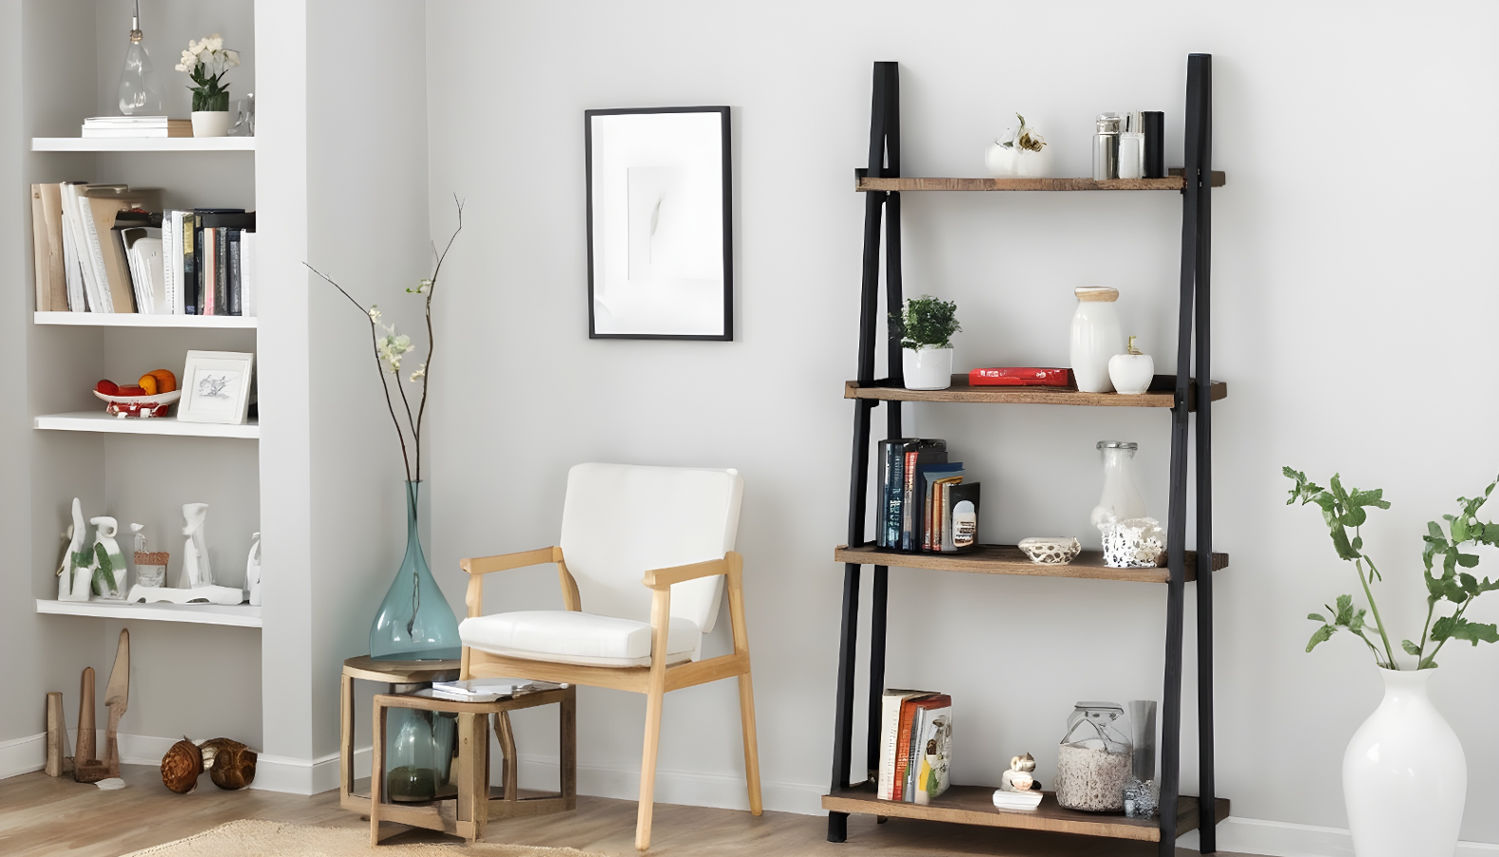 Maximize Vertical Space with Ladder Shelves